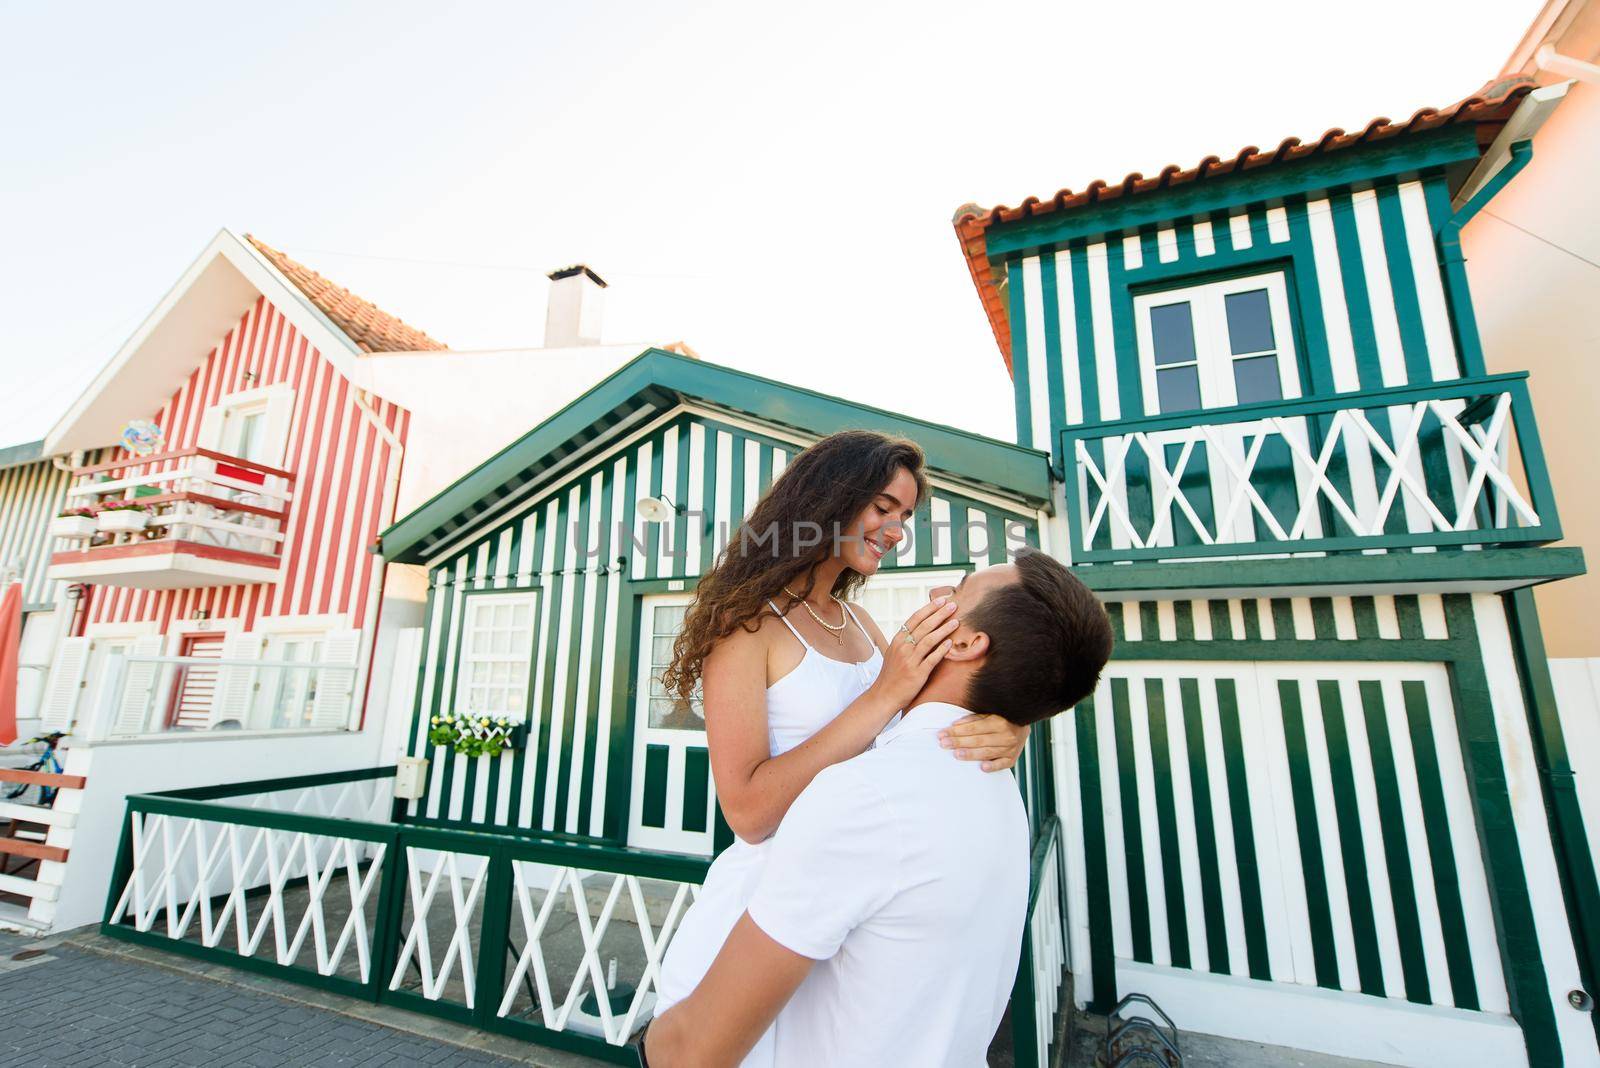 Handsome man puts up his girlfriend and kisses in Aveiro, Portugal near colourful and peaceful houses. Lifestyle of couple in love.